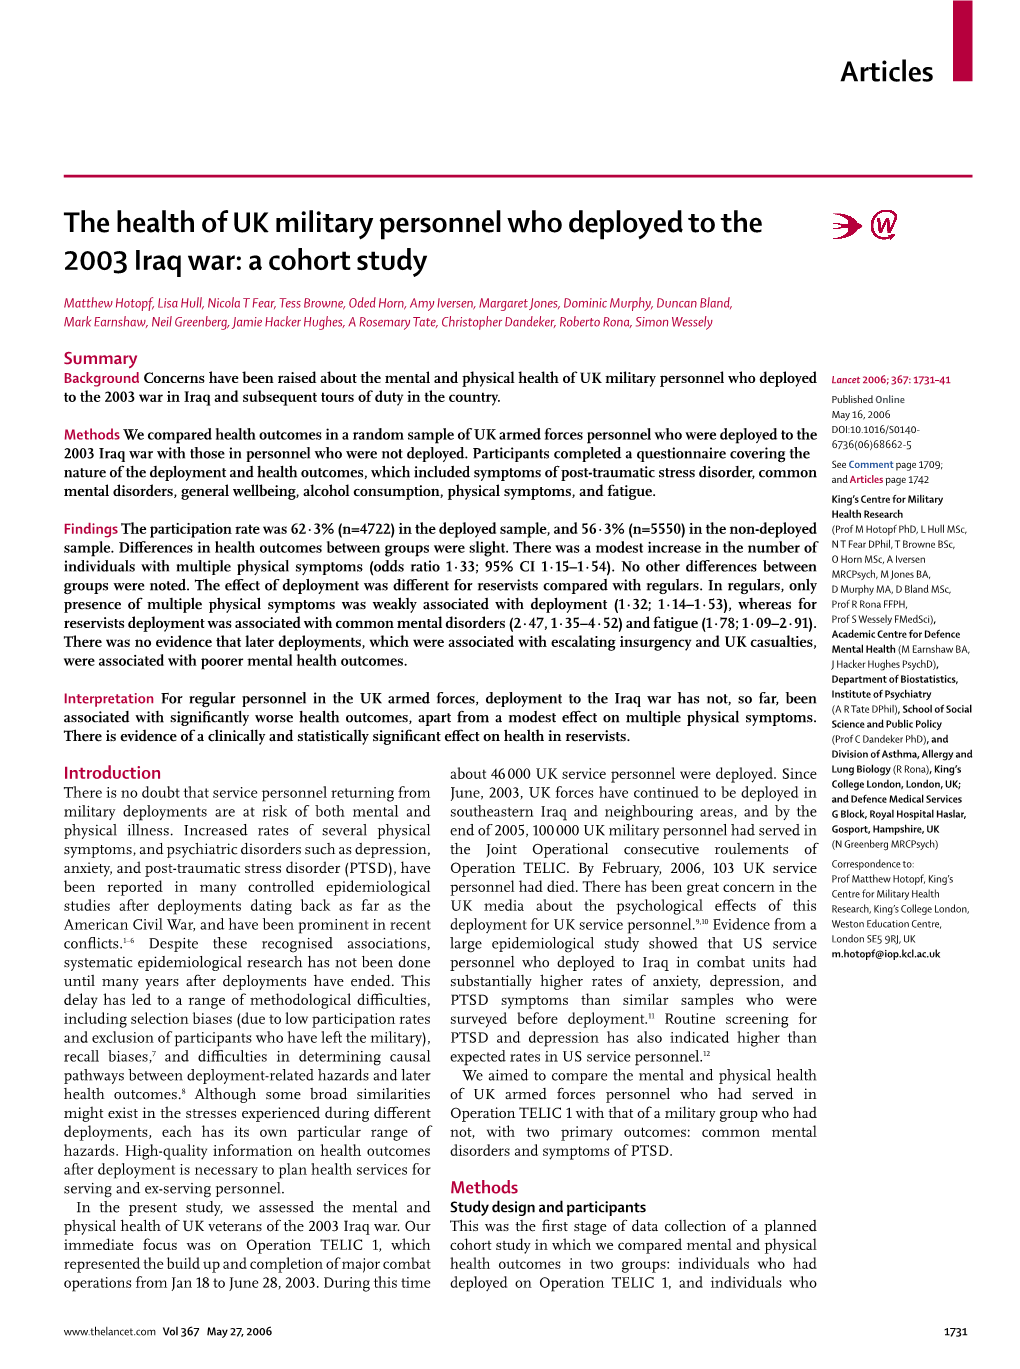 The Health of UK Military Personnel Who Deployed to the 2003 Iraq War: a Cohort Study